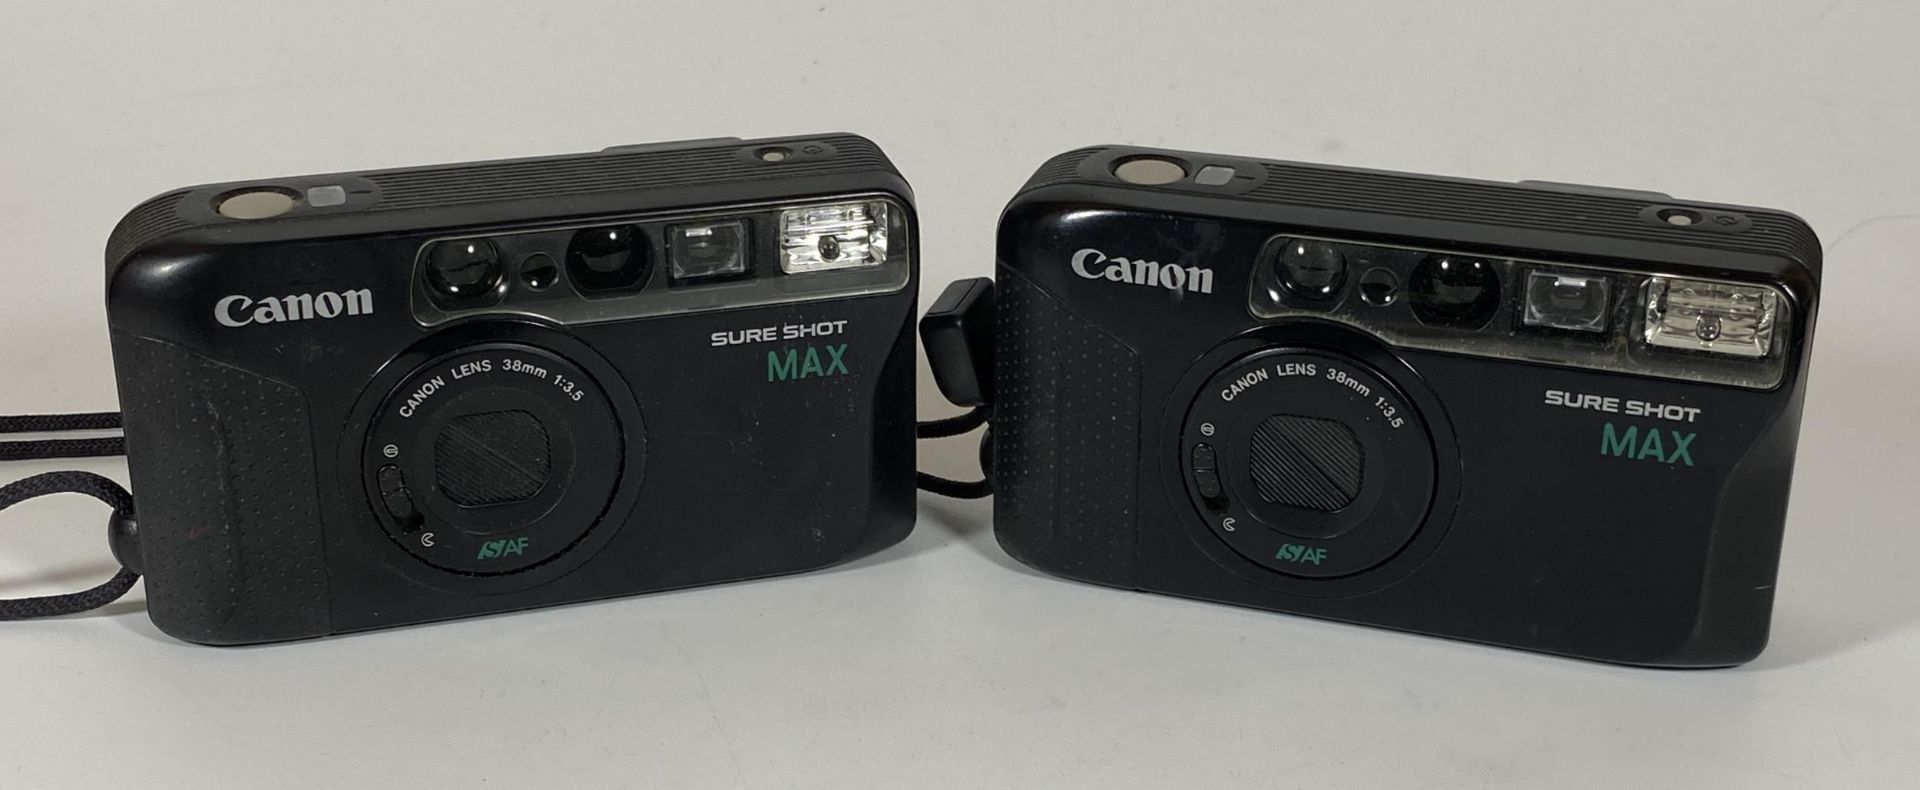 TWO CANON SURESHOT MAX 38MM CAMERAS